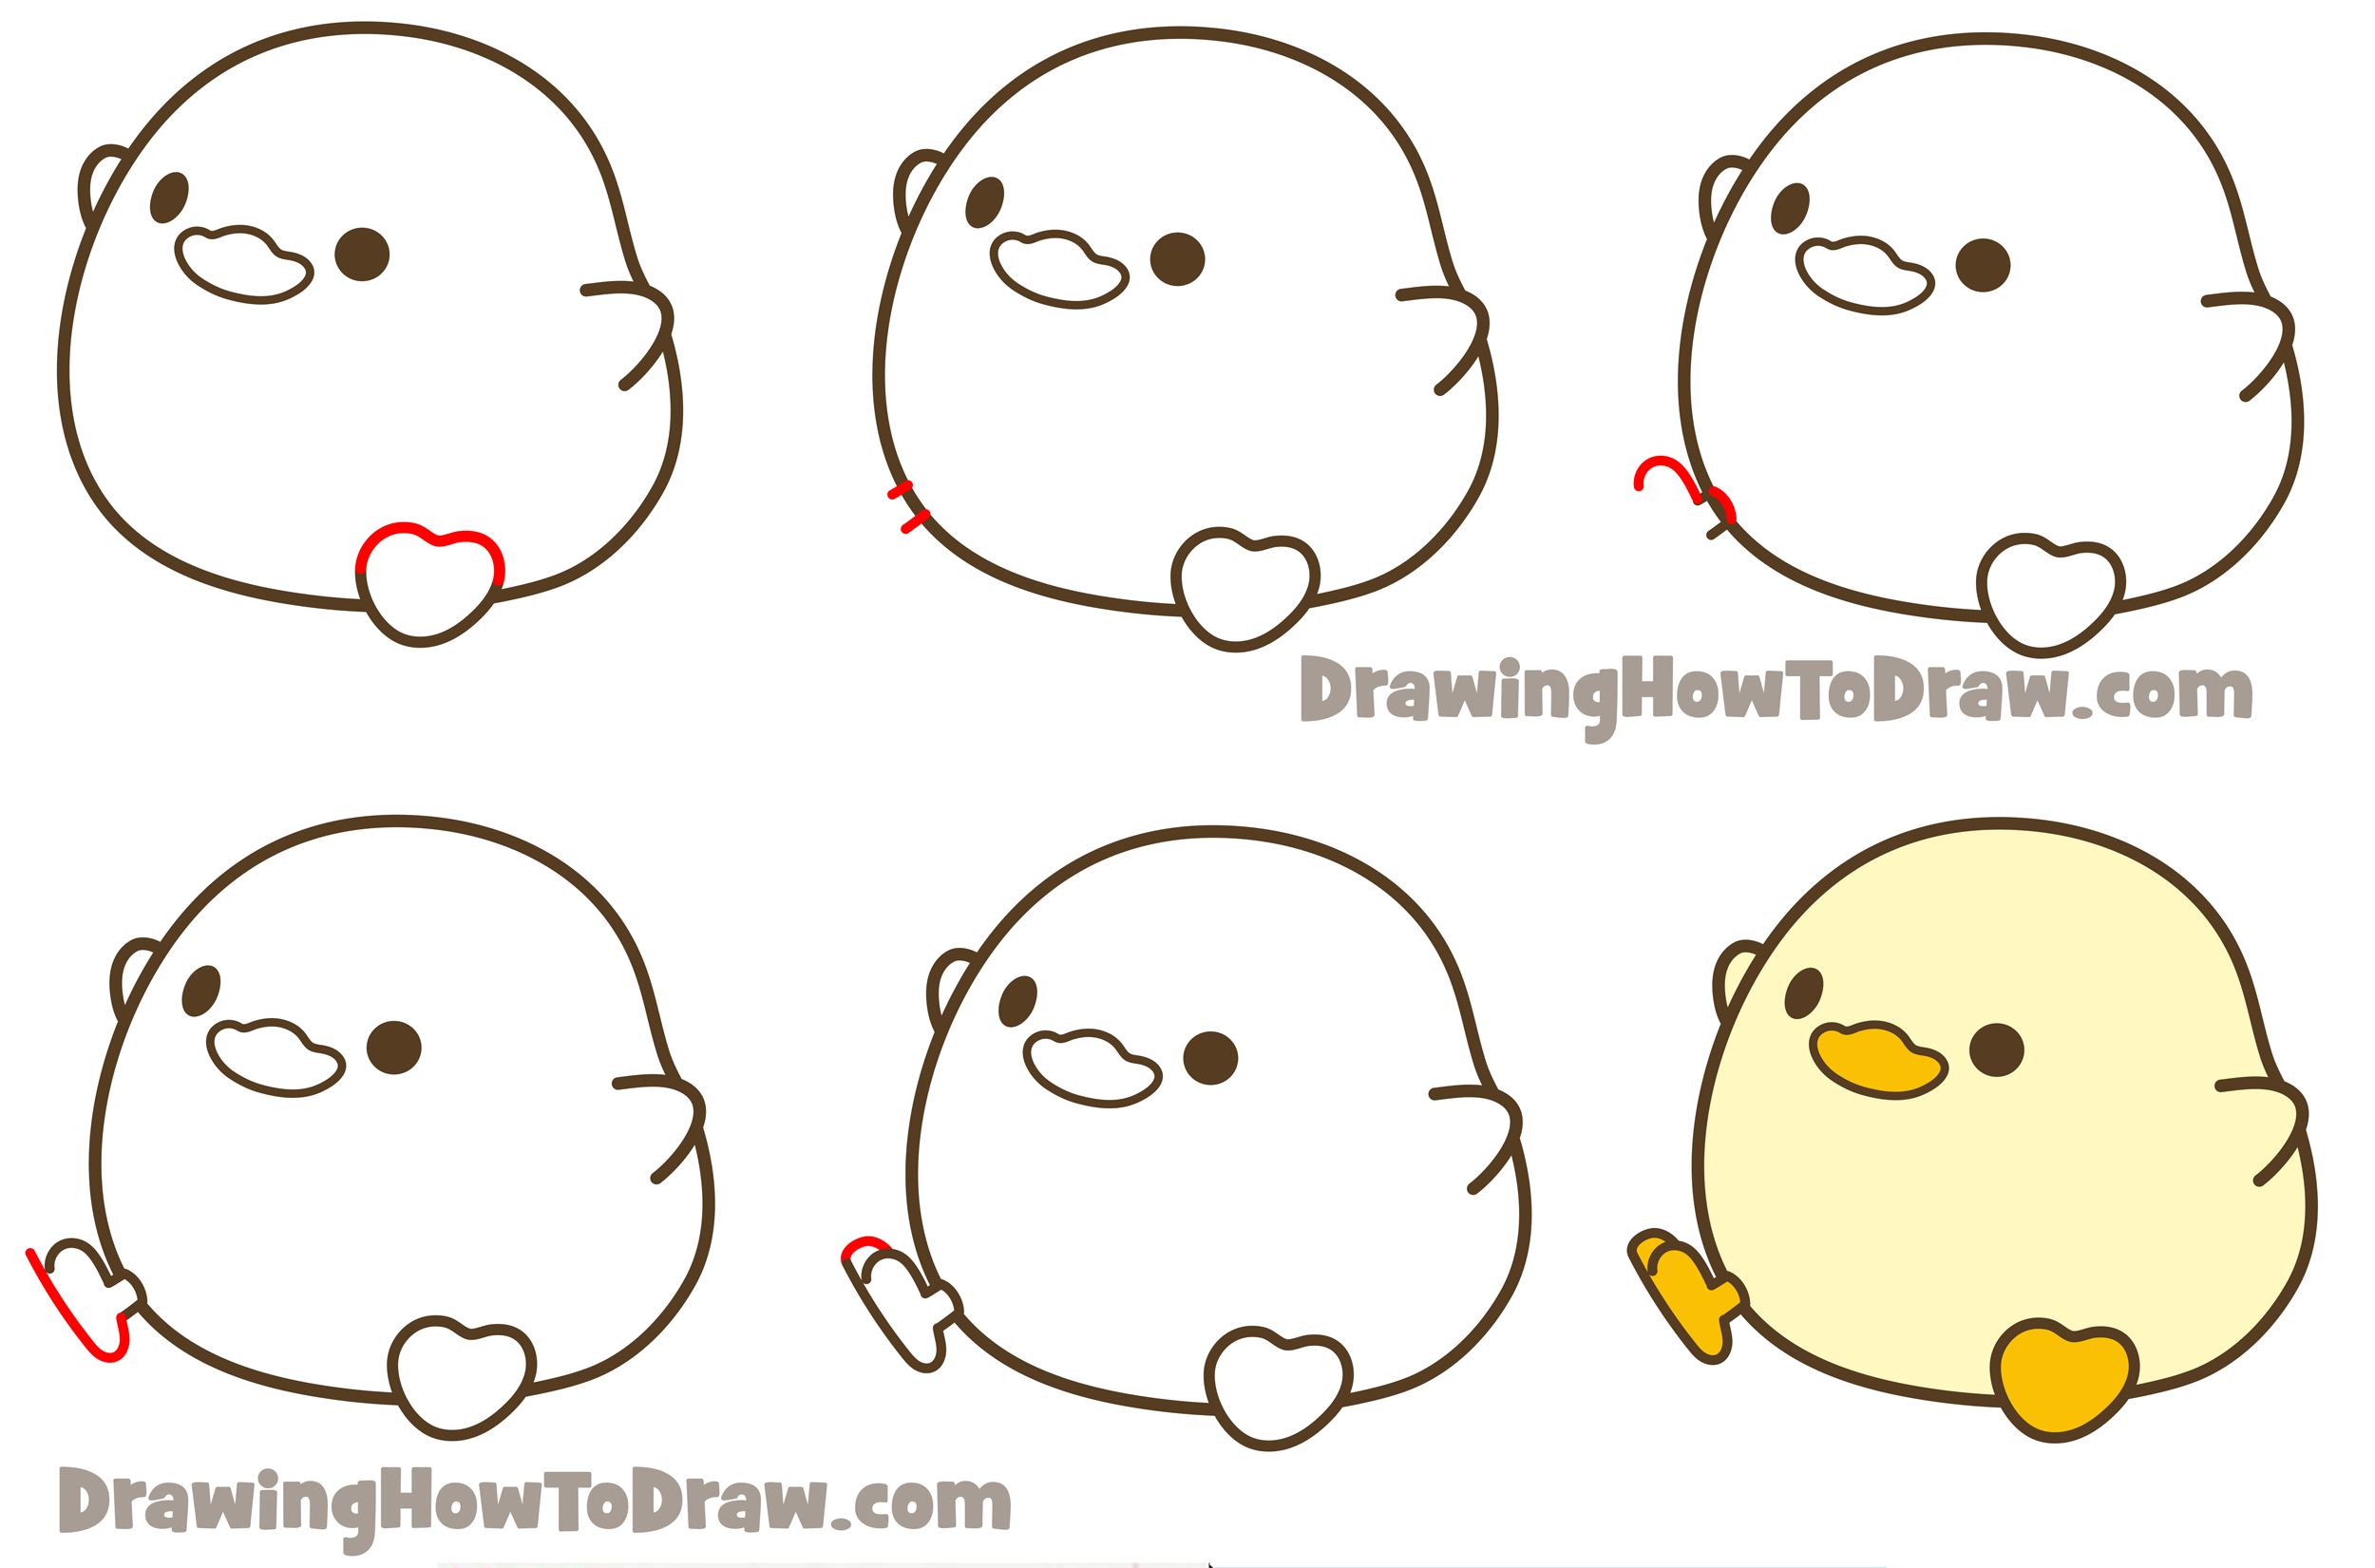 How to Draw a Cute Duck with Easy Step-by-Step Drawing Tutorial for Kids 